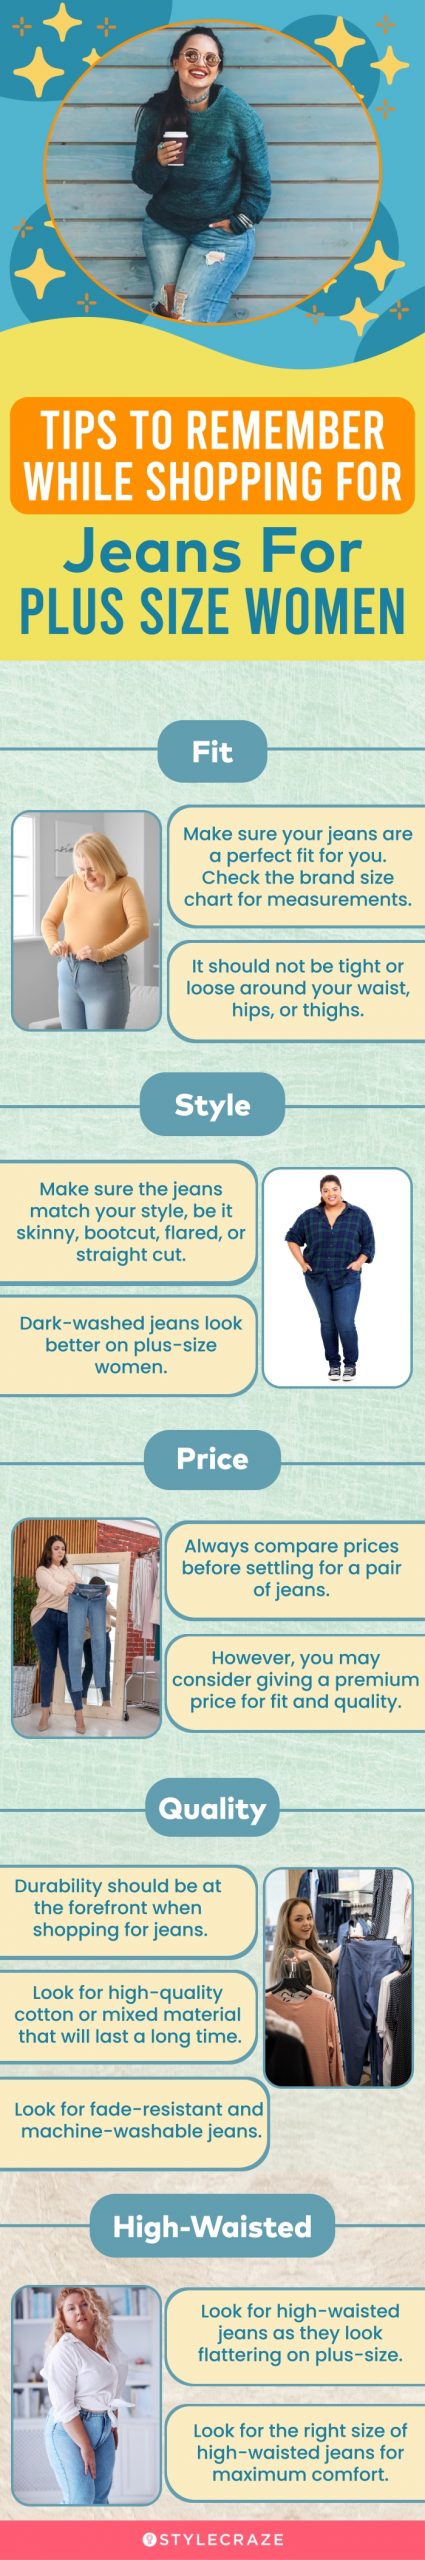 Tips To Remember While Shopping For Jeans For Plus-Size Women